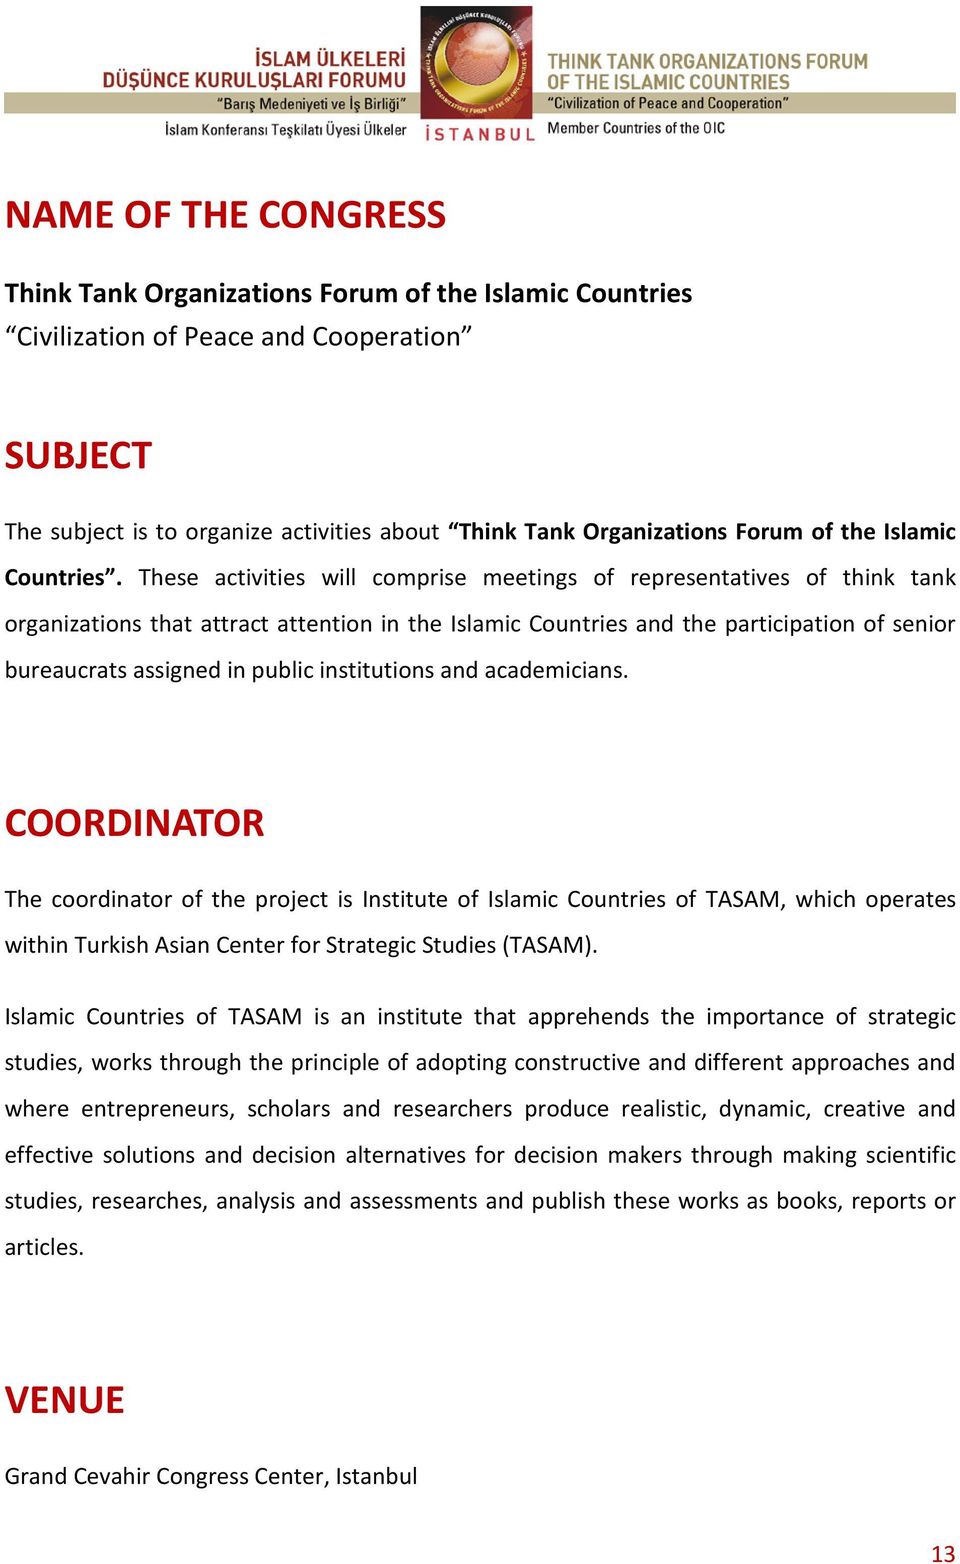 These activities will comprise meetings of representatives of think tank organizations that attract attention in the Islamic Countries and the participation of senior bureaucrats assigned in public